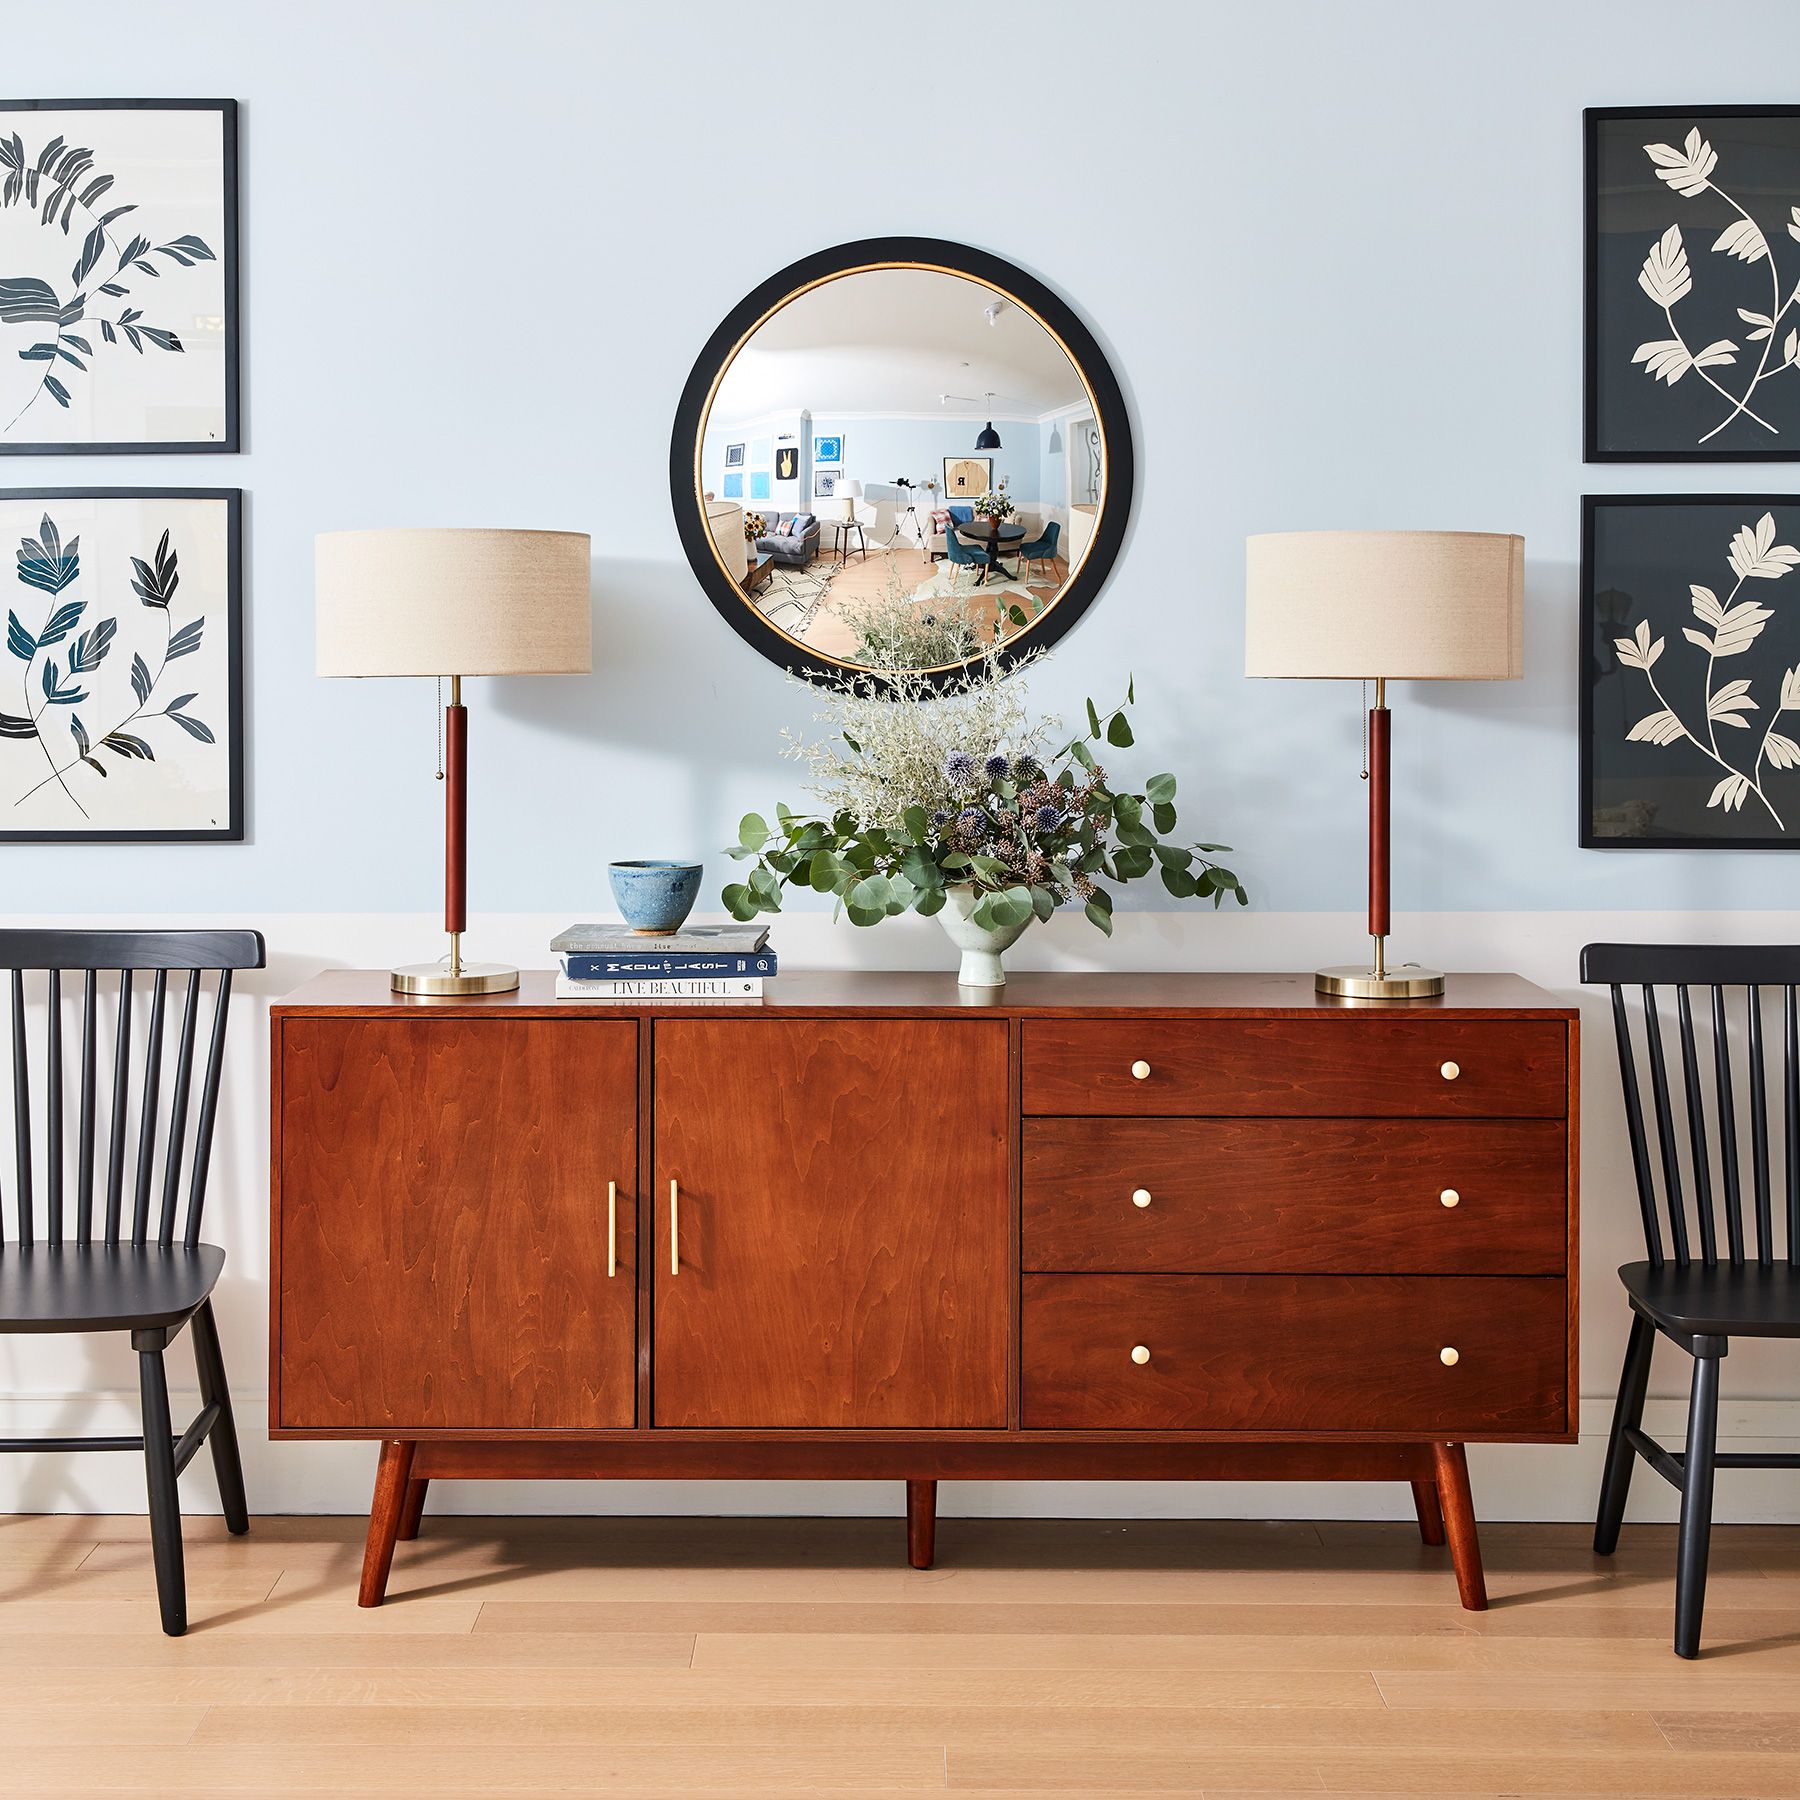 2020 Real Simple Home Tour: Buffet